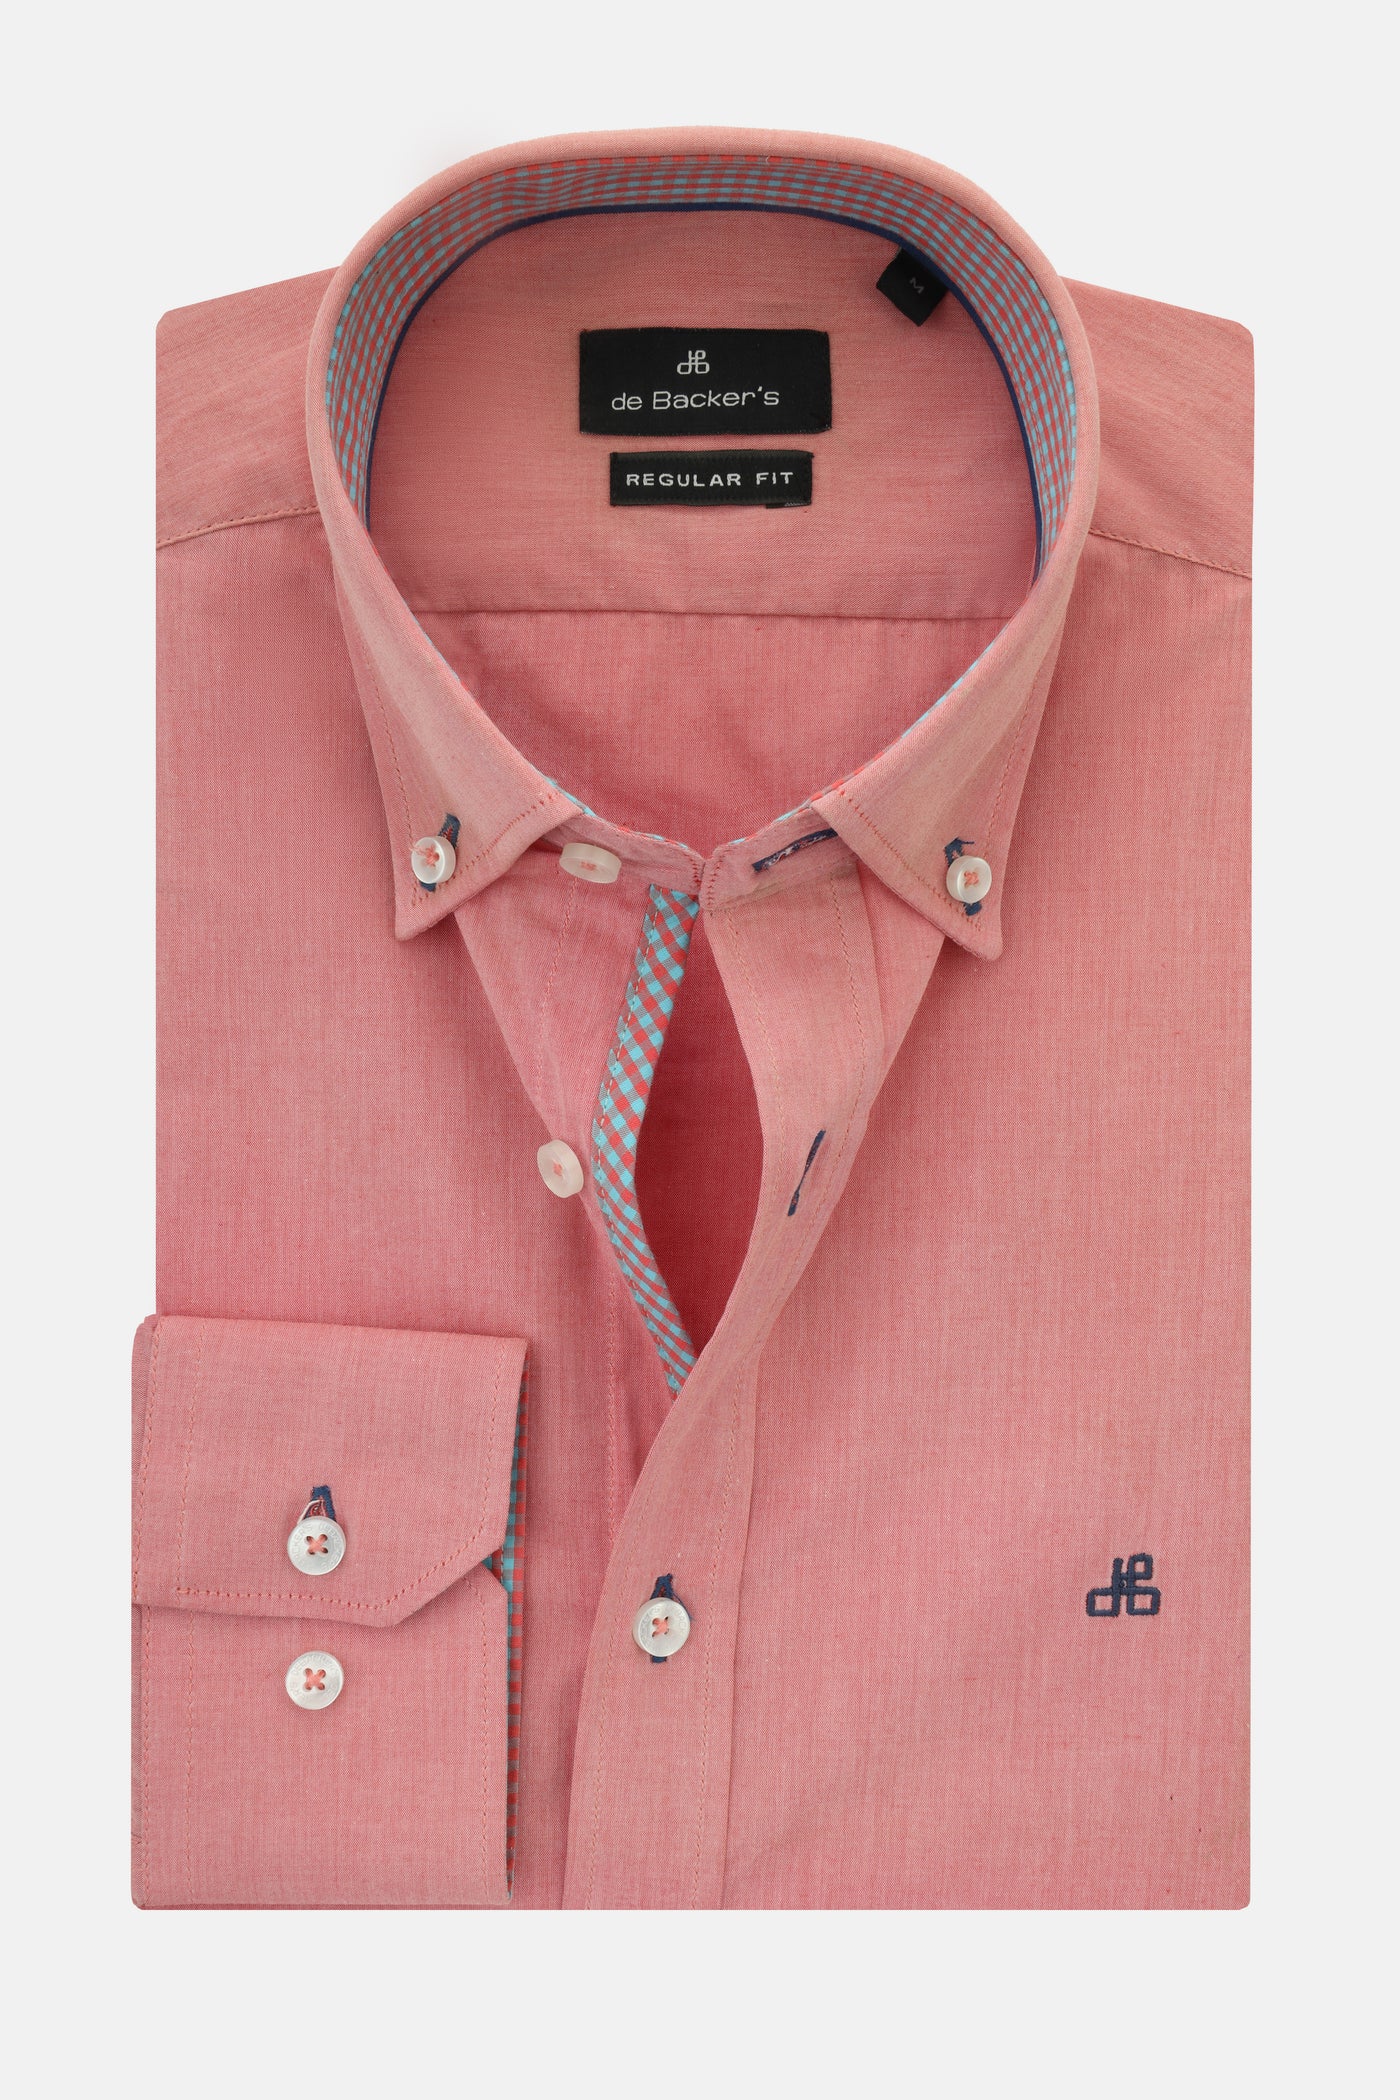 Solid Old Rose Cotton Semi Classic Shirt